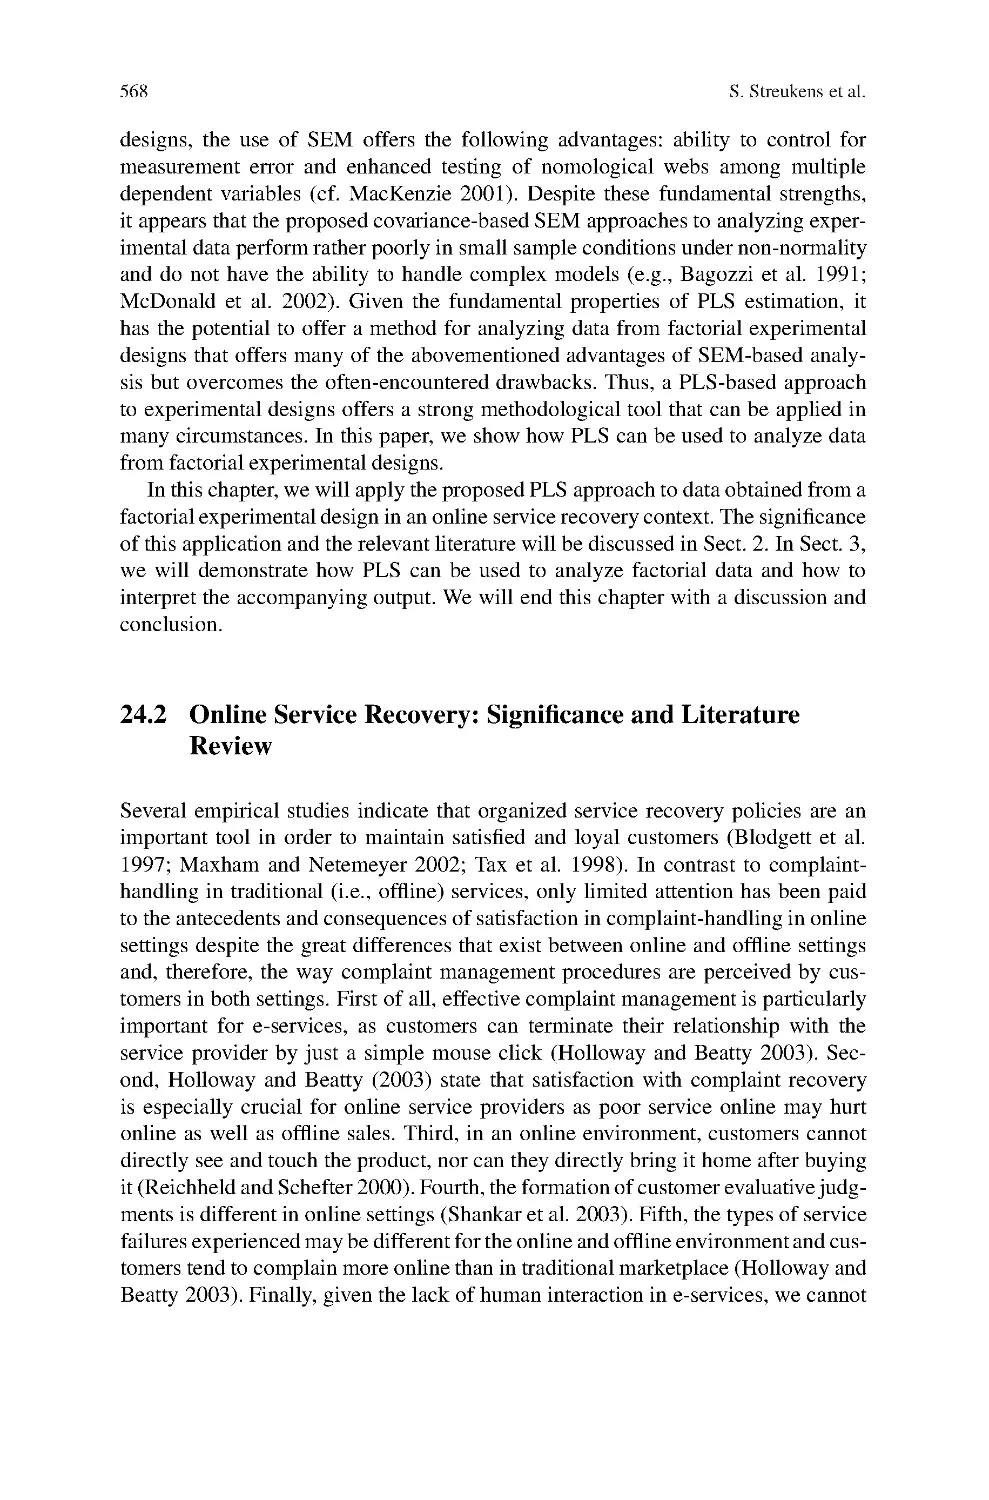 24.2 Online Service Recovery: Significance and Literature Review